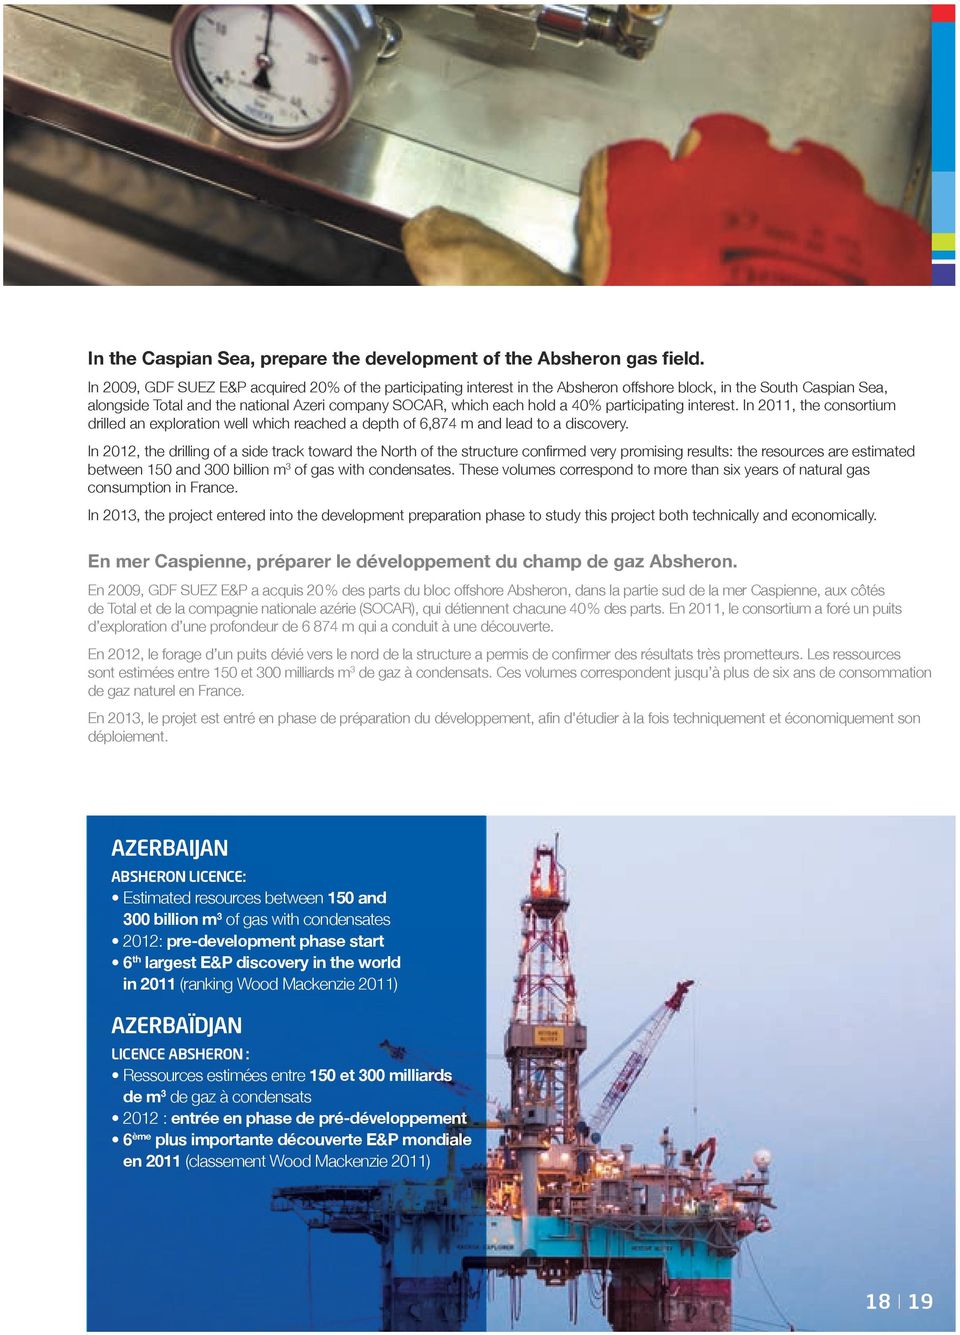 participating interest. In 2011, the consortium drilled an exploration well which reached a depth of 6,874 m and lead to a discovery.